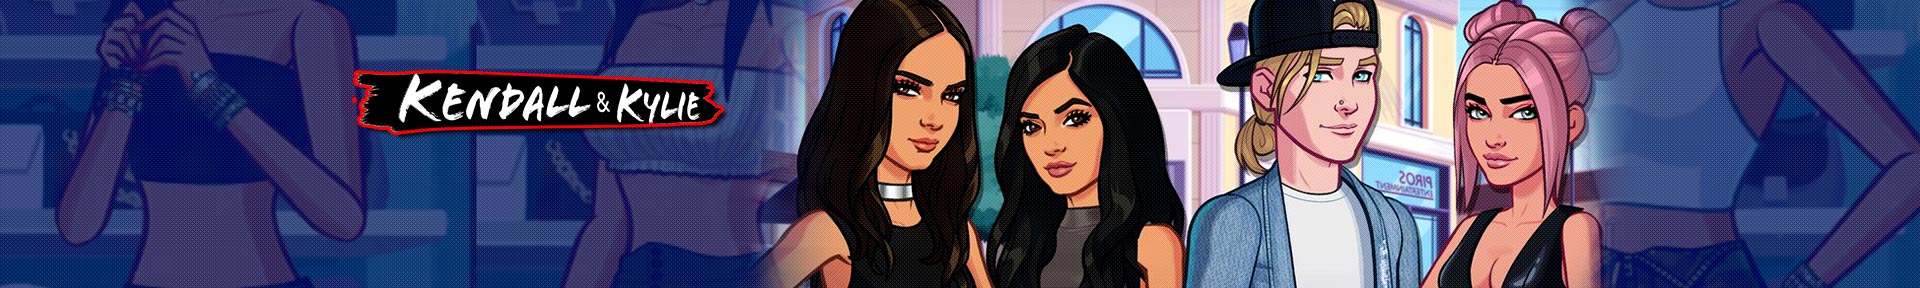 Kendall and Kylie K-Gems & Money